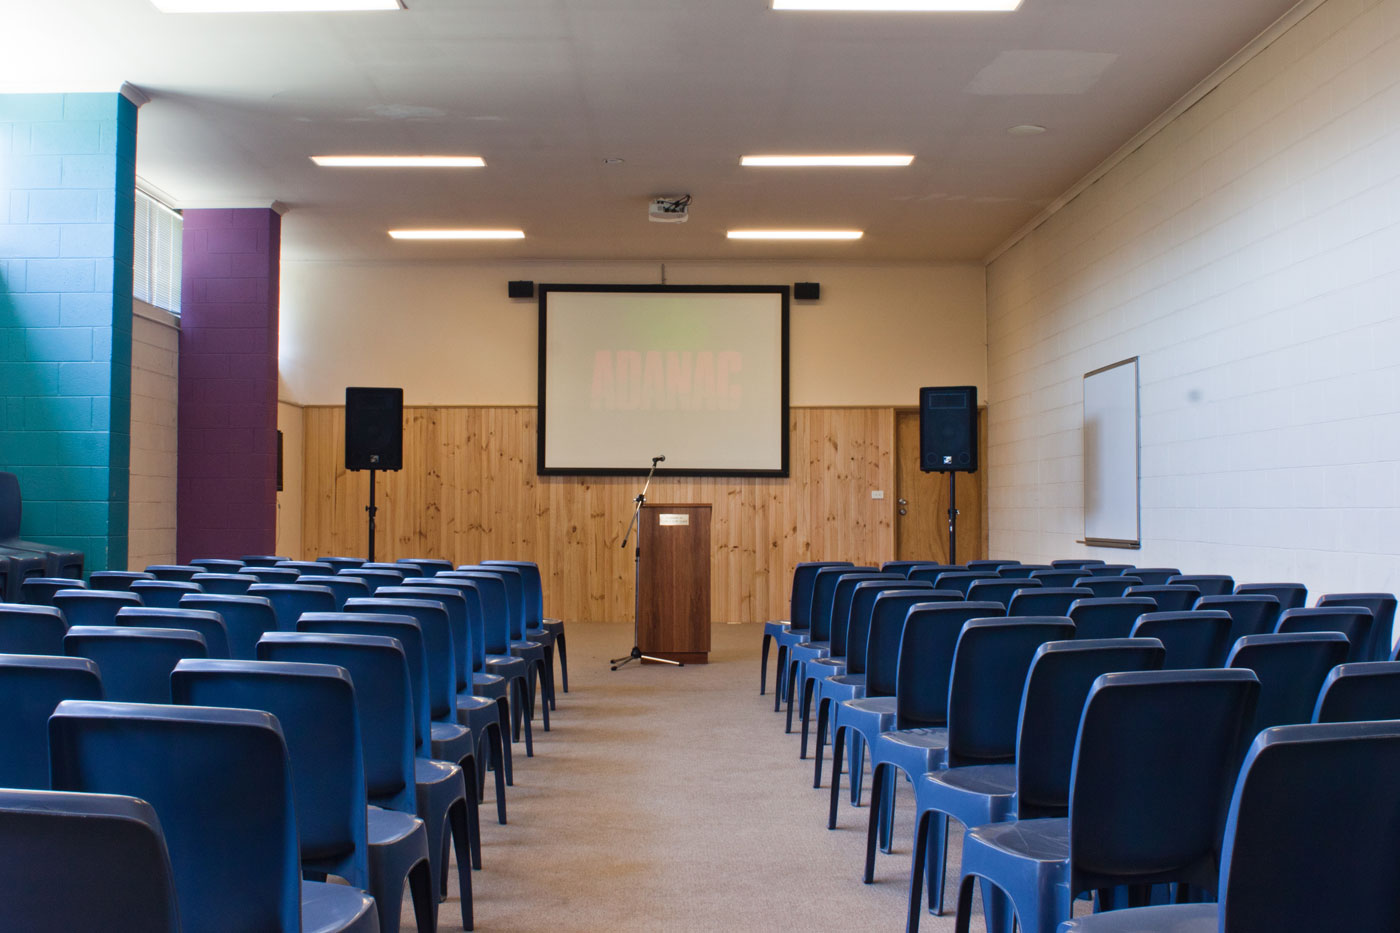 blue chairs in a function room with screen and lecturn at the front